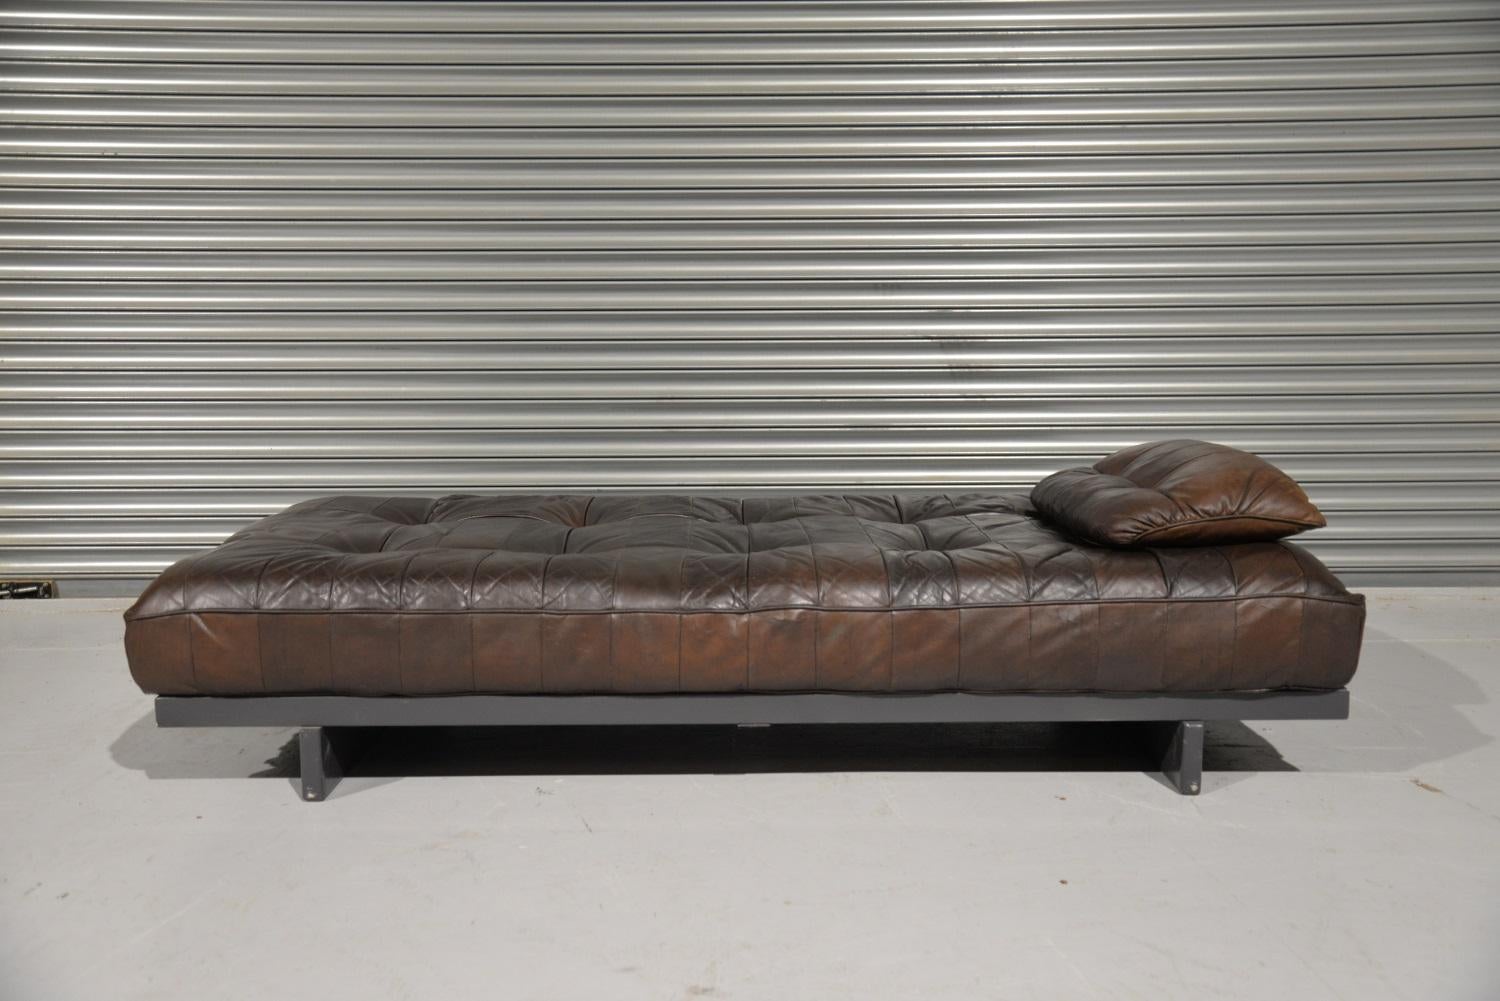 Discounted airfreight for our US and International customers (from 2 weeks door to door).

We are delighted to bring to a rare De Sede DS 80 patchwork leather daybed with patchwork cushion. Hand built in the 1960s by De Sede craftsman in